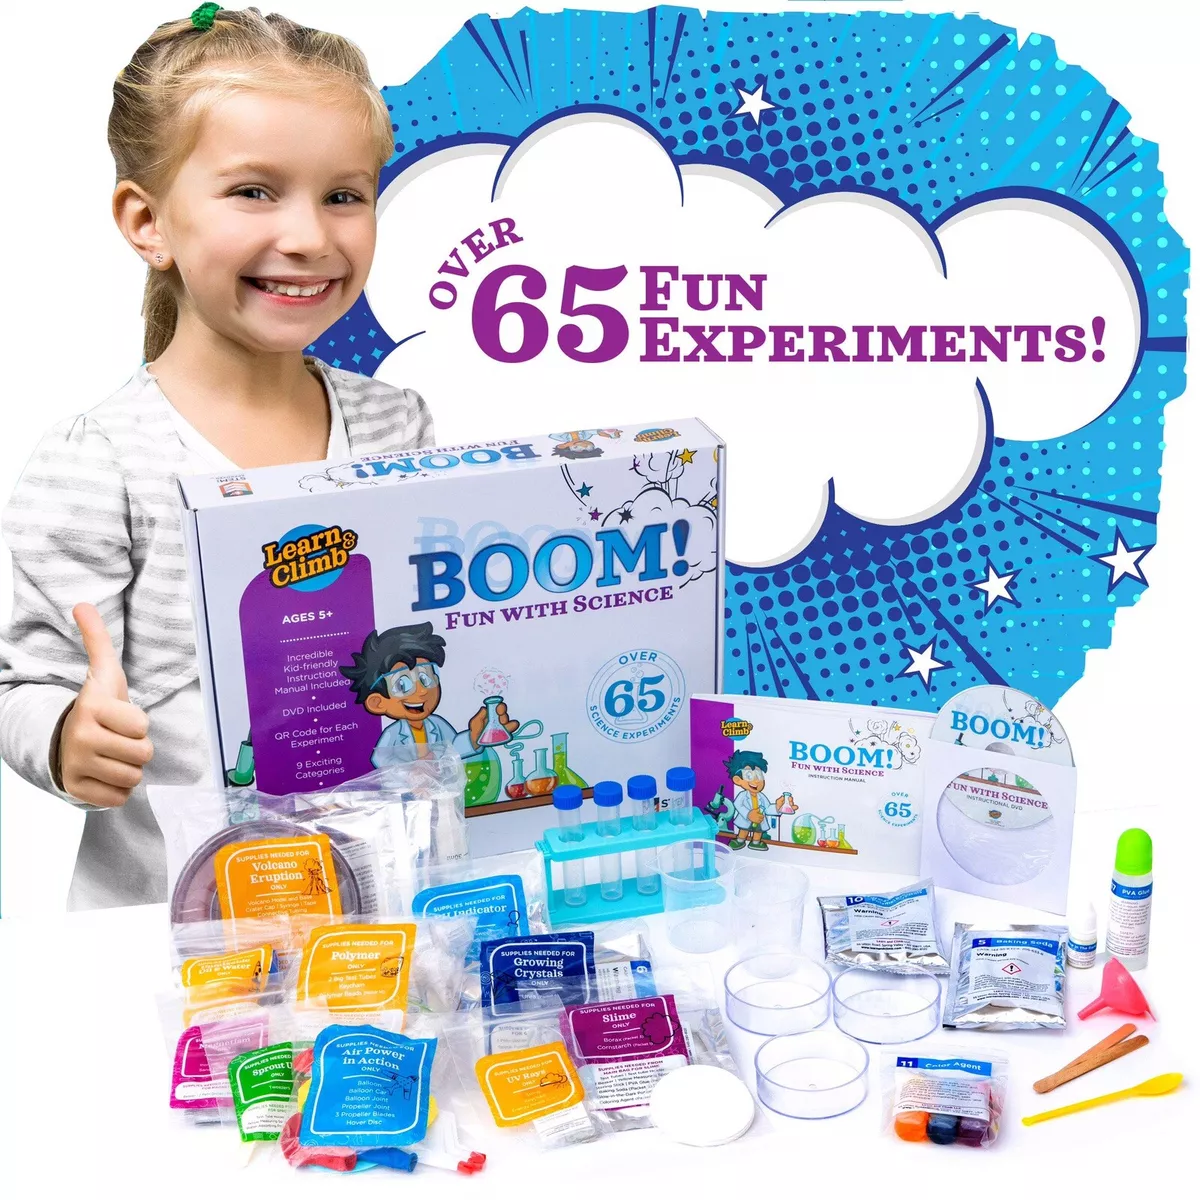 Learn & Climb [Sponsored]Kids Science Set - Over 60 Experiments Kit, How-To DVD